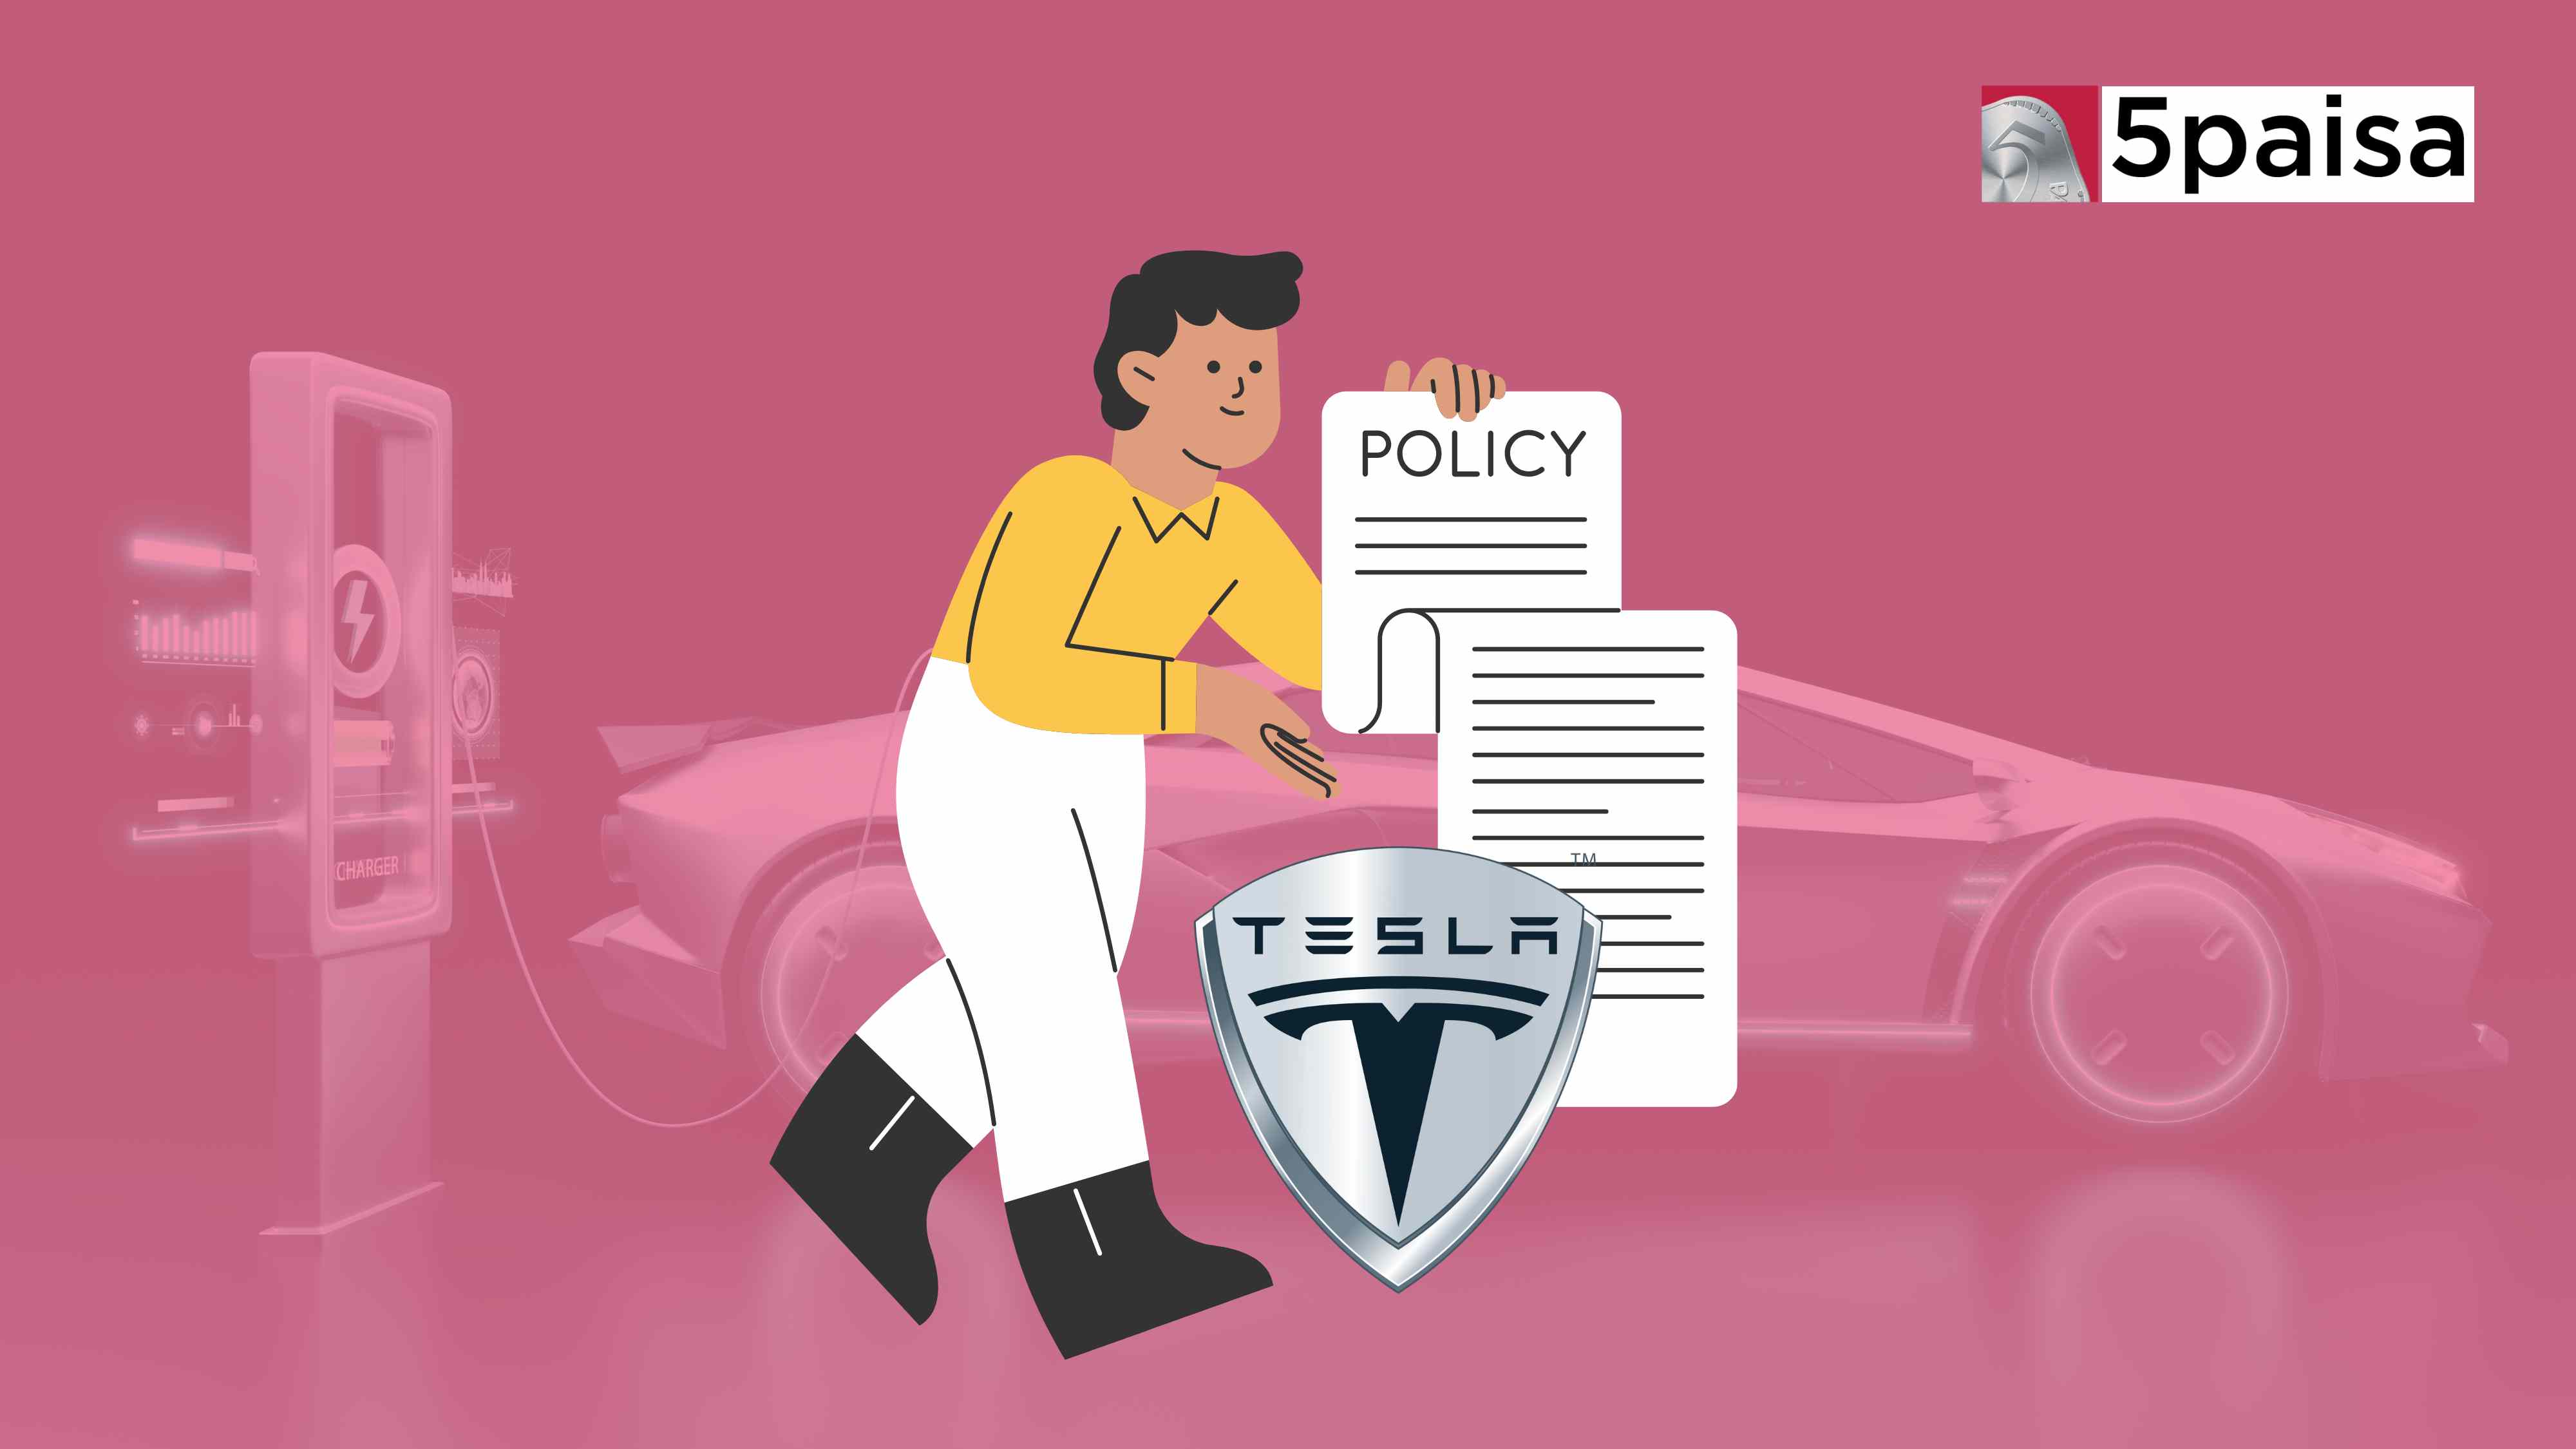 India's New EV Policy Boosts Tesla's Market Entry Plans